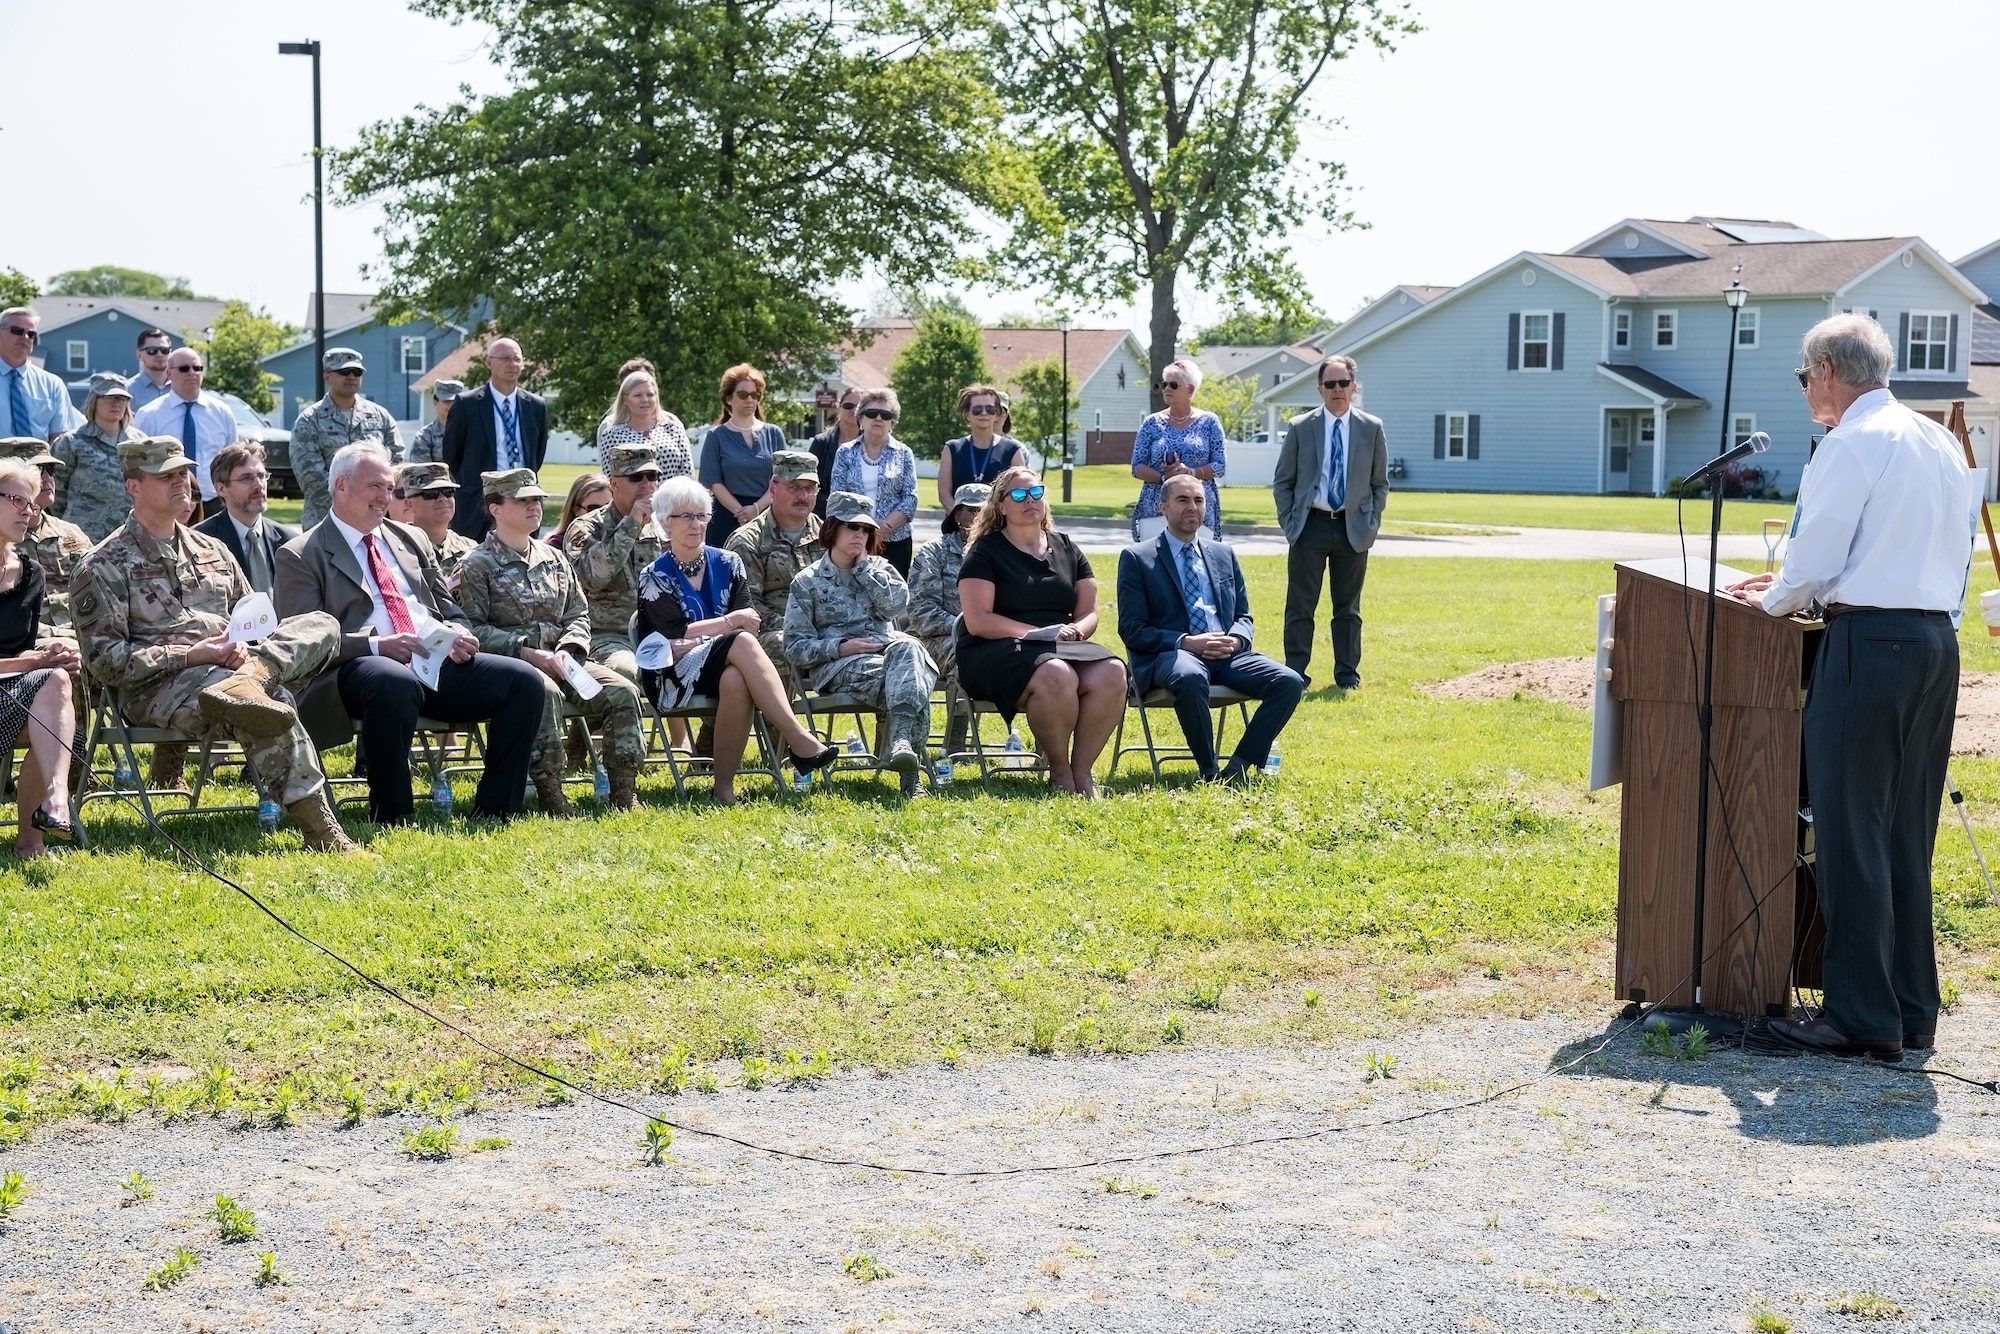 Sen. Tom Carper, D-Del., speaks at a groundbreaking ceremony for the new Welch Elementary School/Dover Air Base Middle School June 3, 2019, in the family housing area at Dover Air Force Base, Del. The $48 million  project federally funded by the Department of Defense Education Activity will be built at the football field across the street form the Youth Center and adjacent to the existing elementary and middle schools. Scheduled to open at the beginning of the 2021 school year, the new building will have more than 105,000 square feet in learning space for approximately 490 students. (U.S. Air Force photo by Roland Balik)